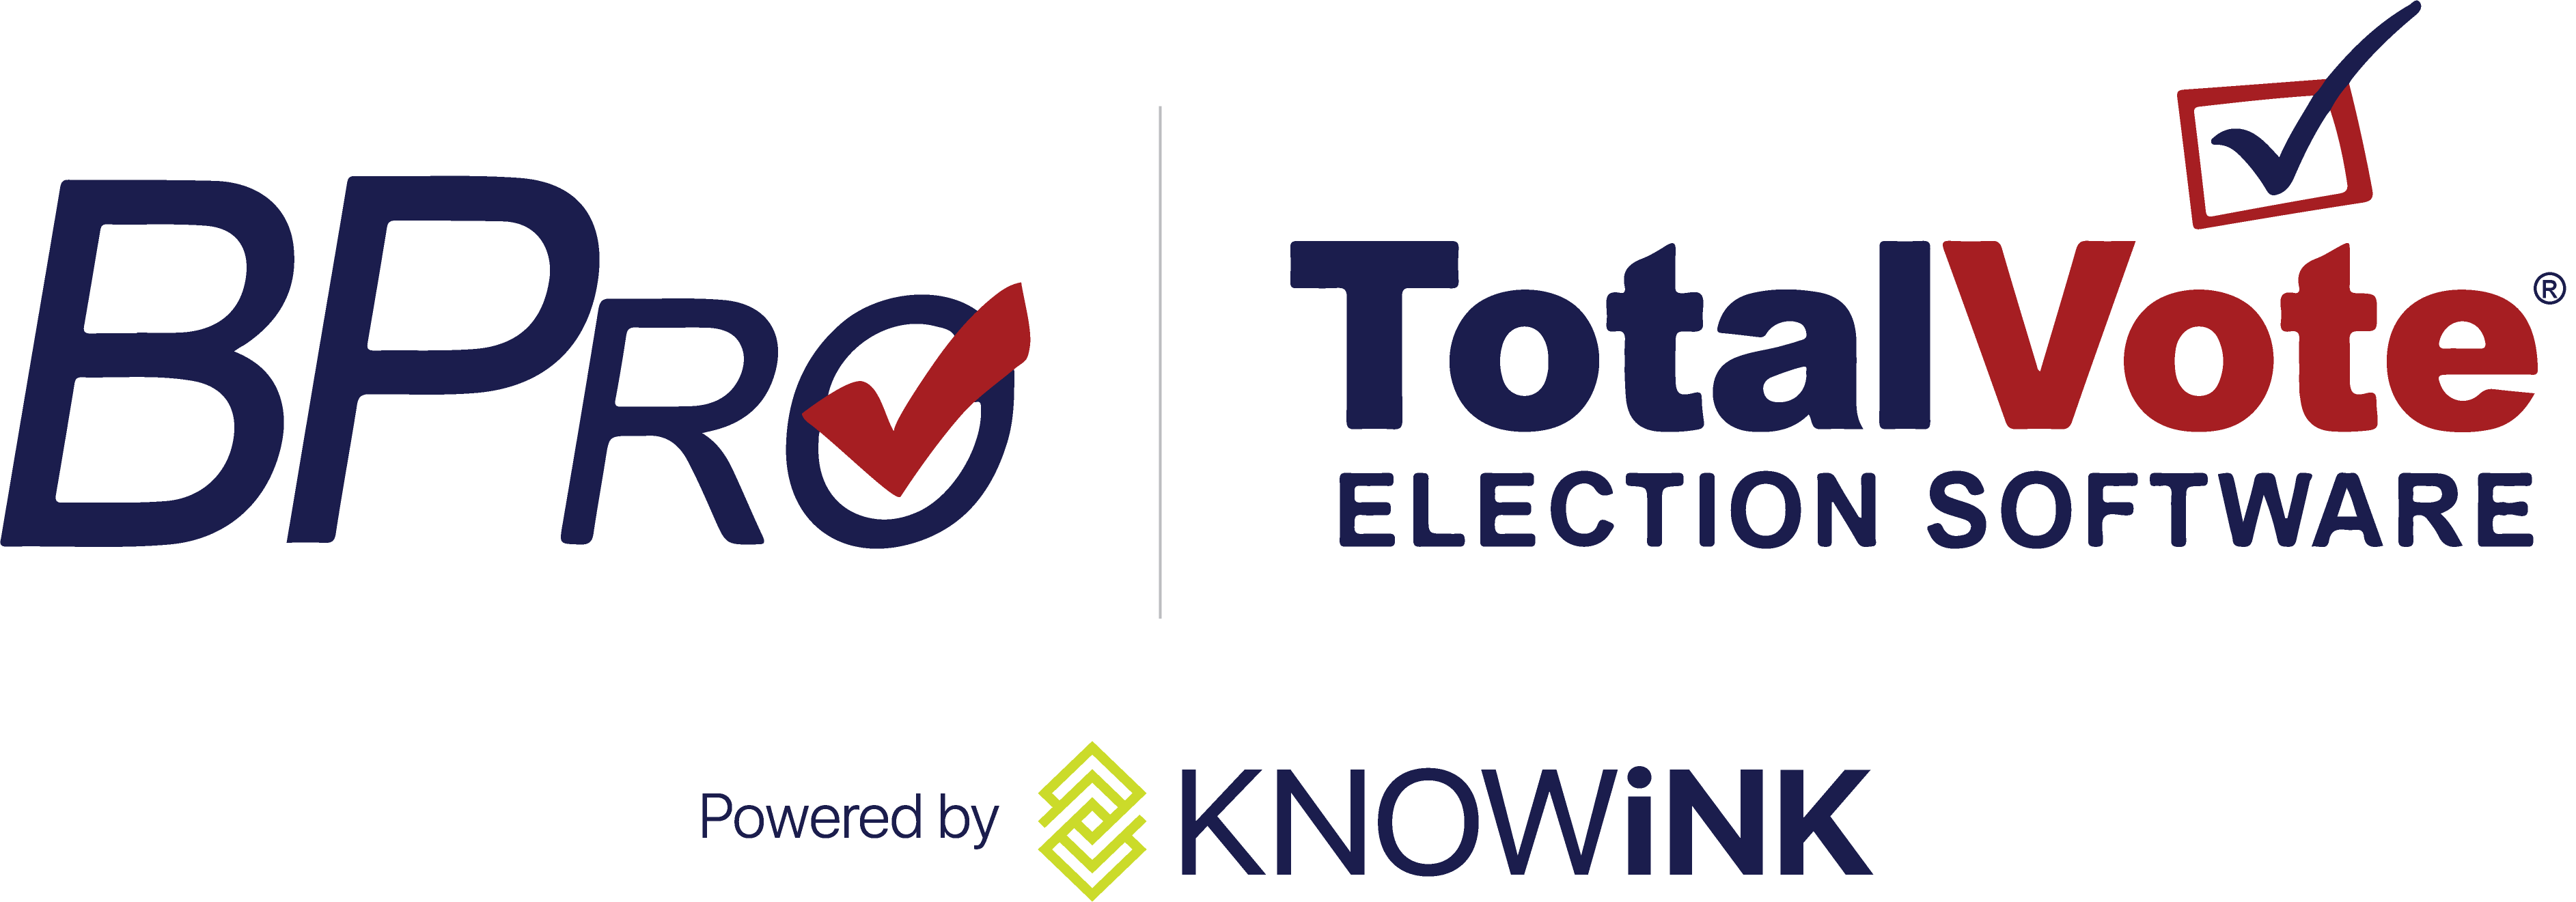 knowink products - Bpro TotalVote